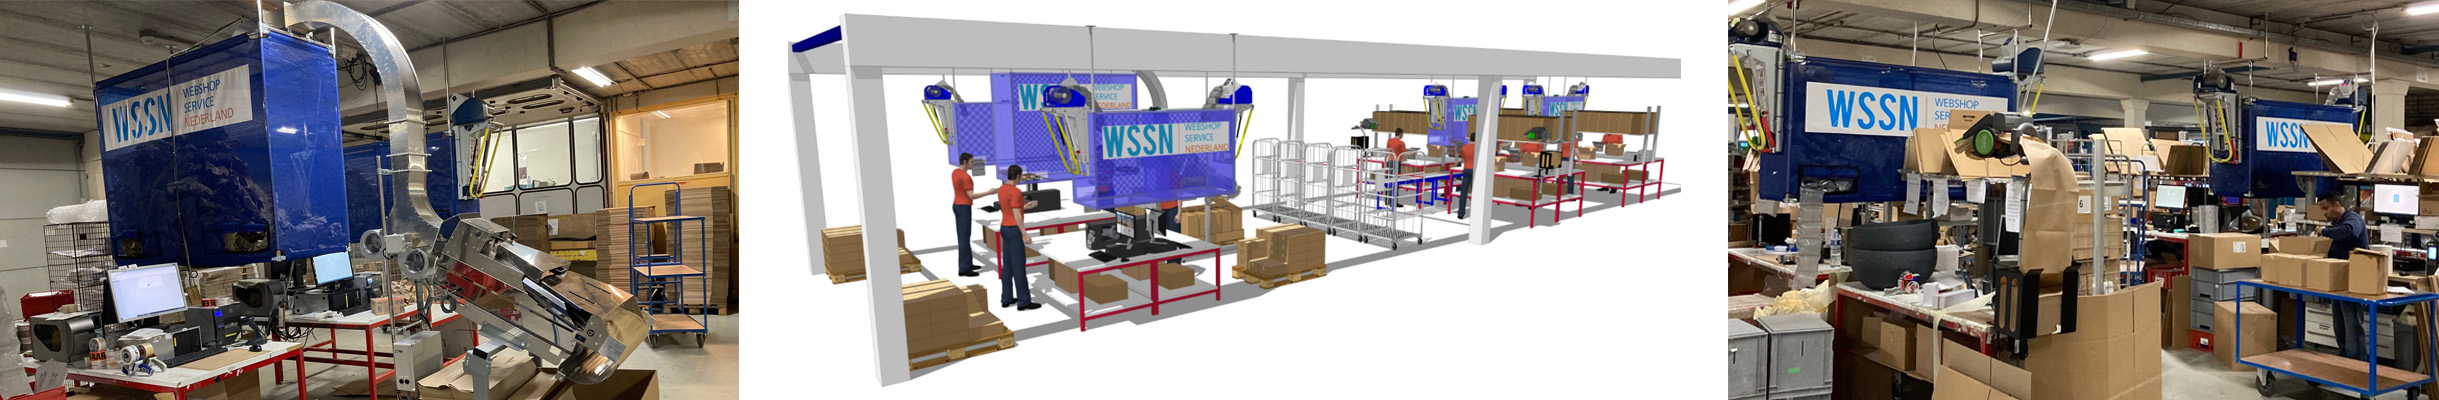 3D render of a hybrid packaging system with air cushion packaging, paper pads, and paper void fill, designed by Pregis for WSSN (WebShop Service Nederland).